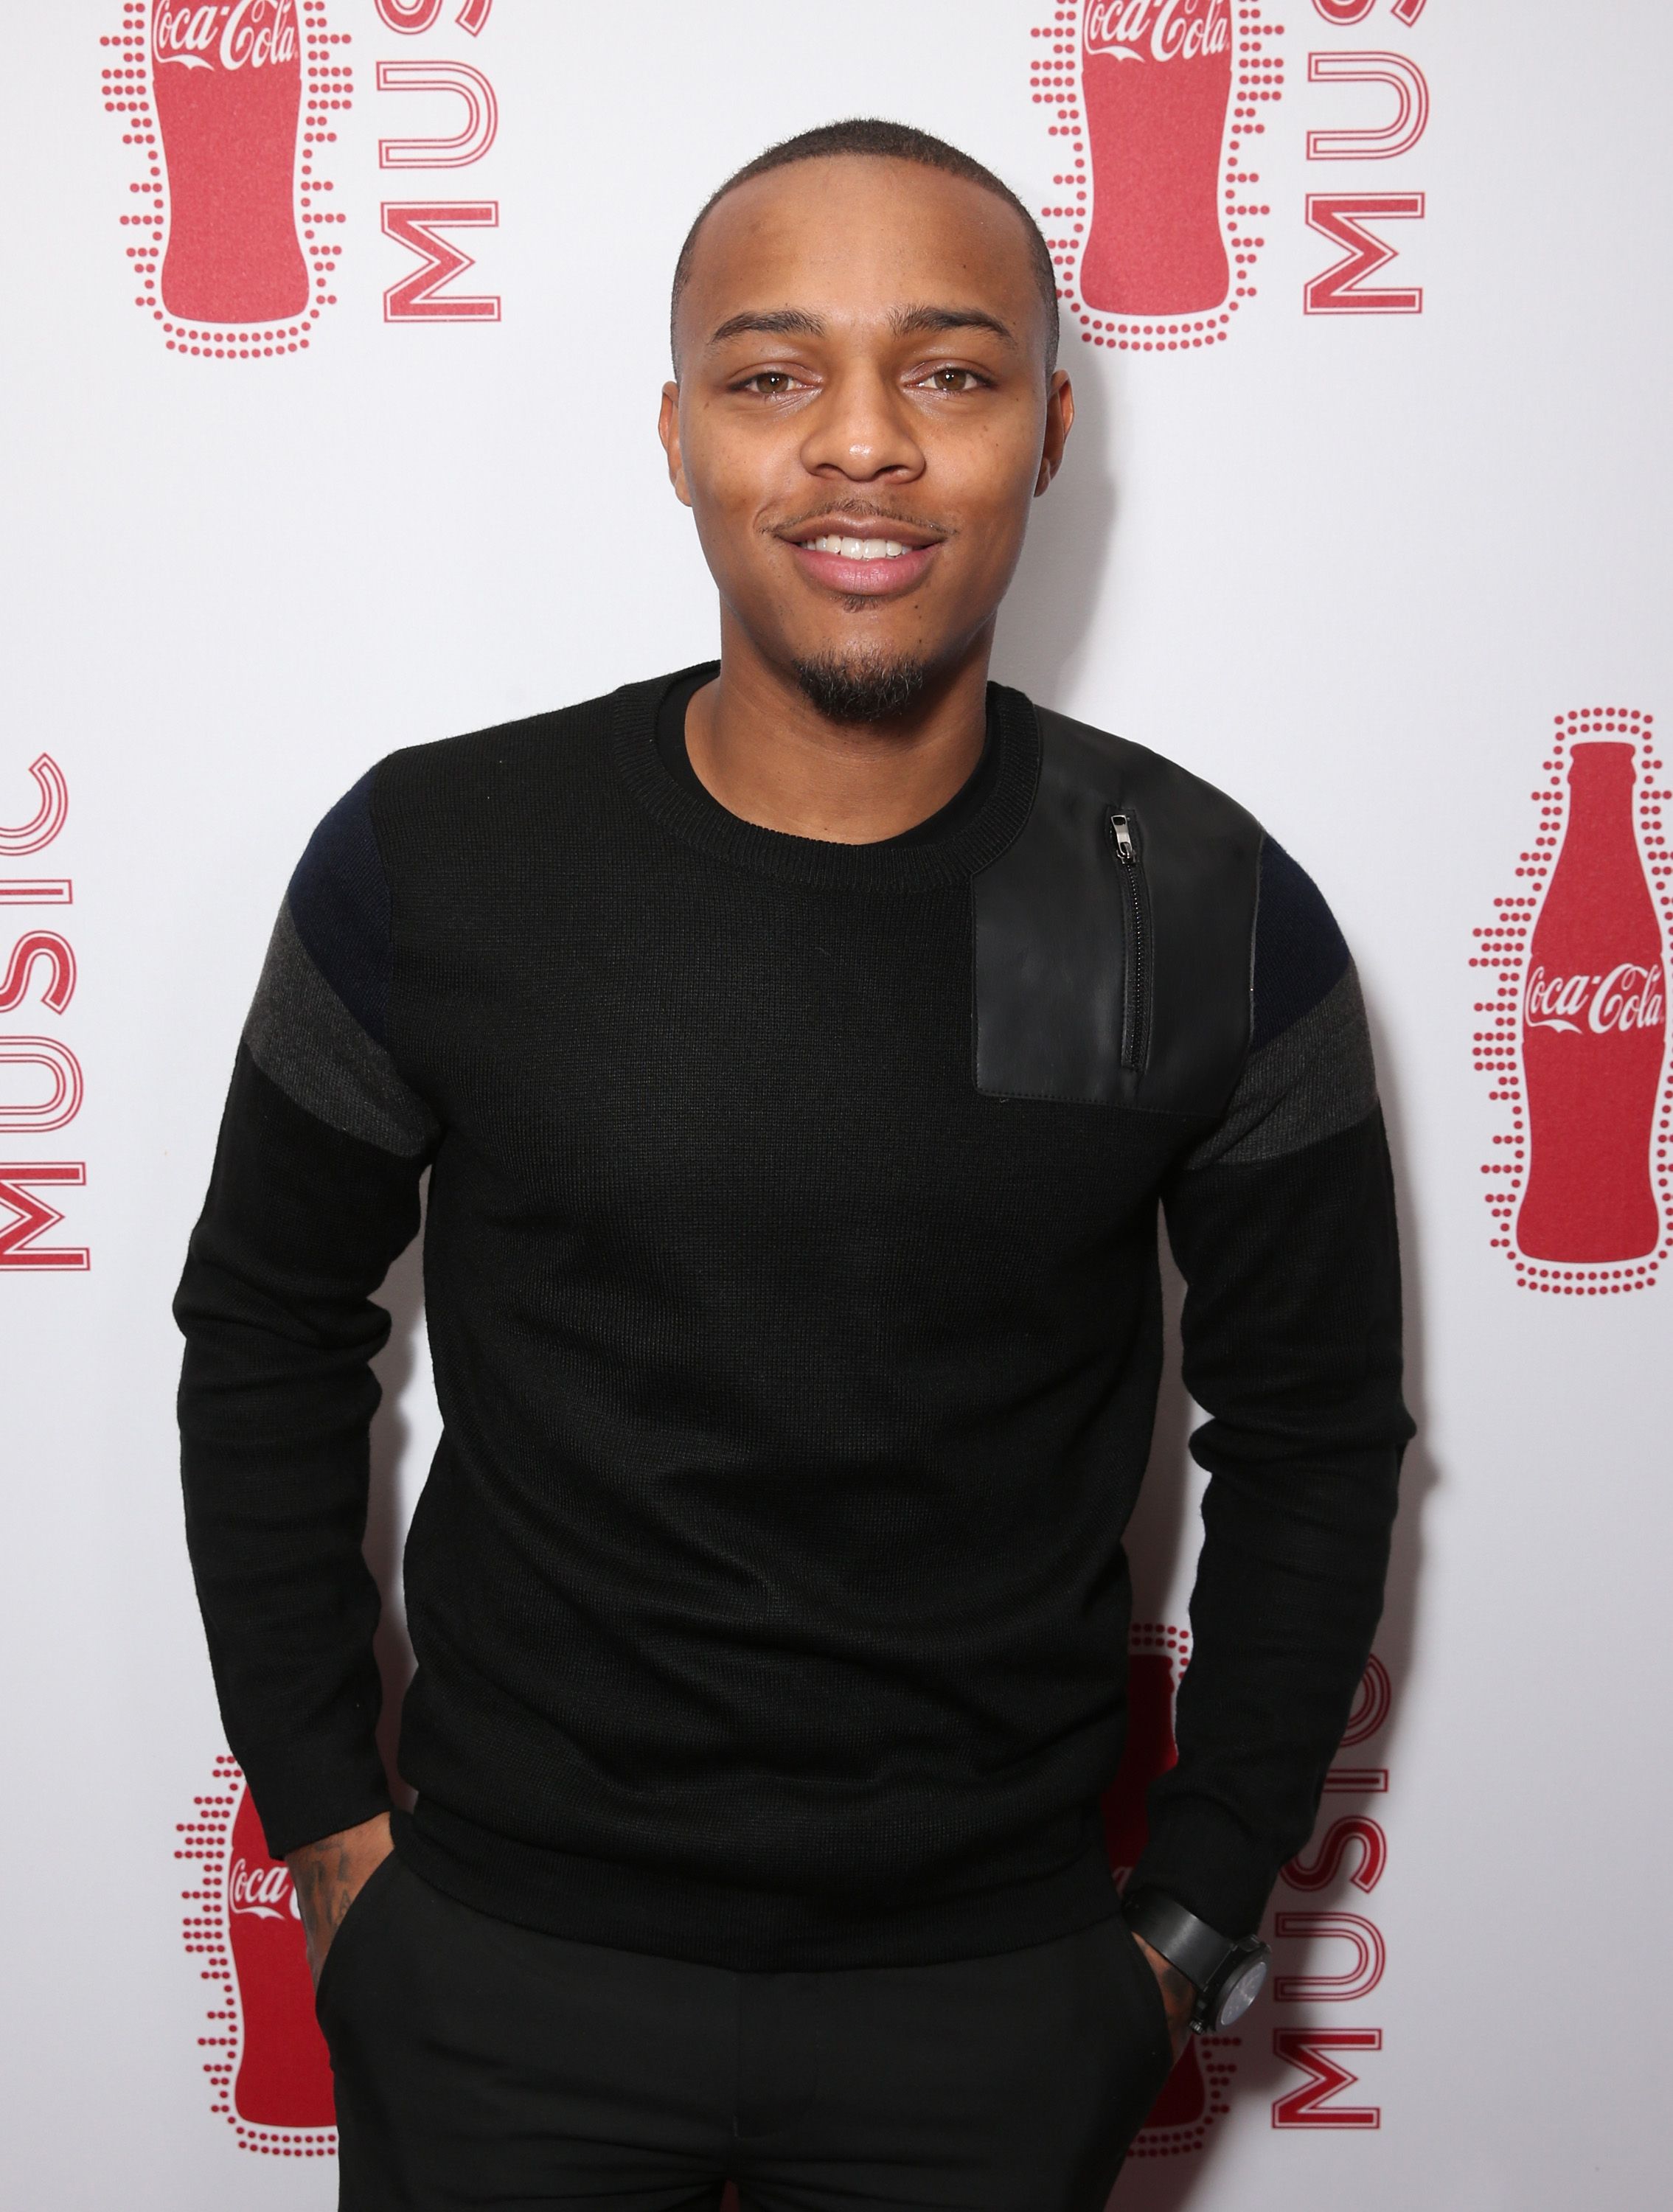 Rapper Bow Wow attending the 2015 American Music Awards pre-party in Los Angeles. | Photo: Getty Images.